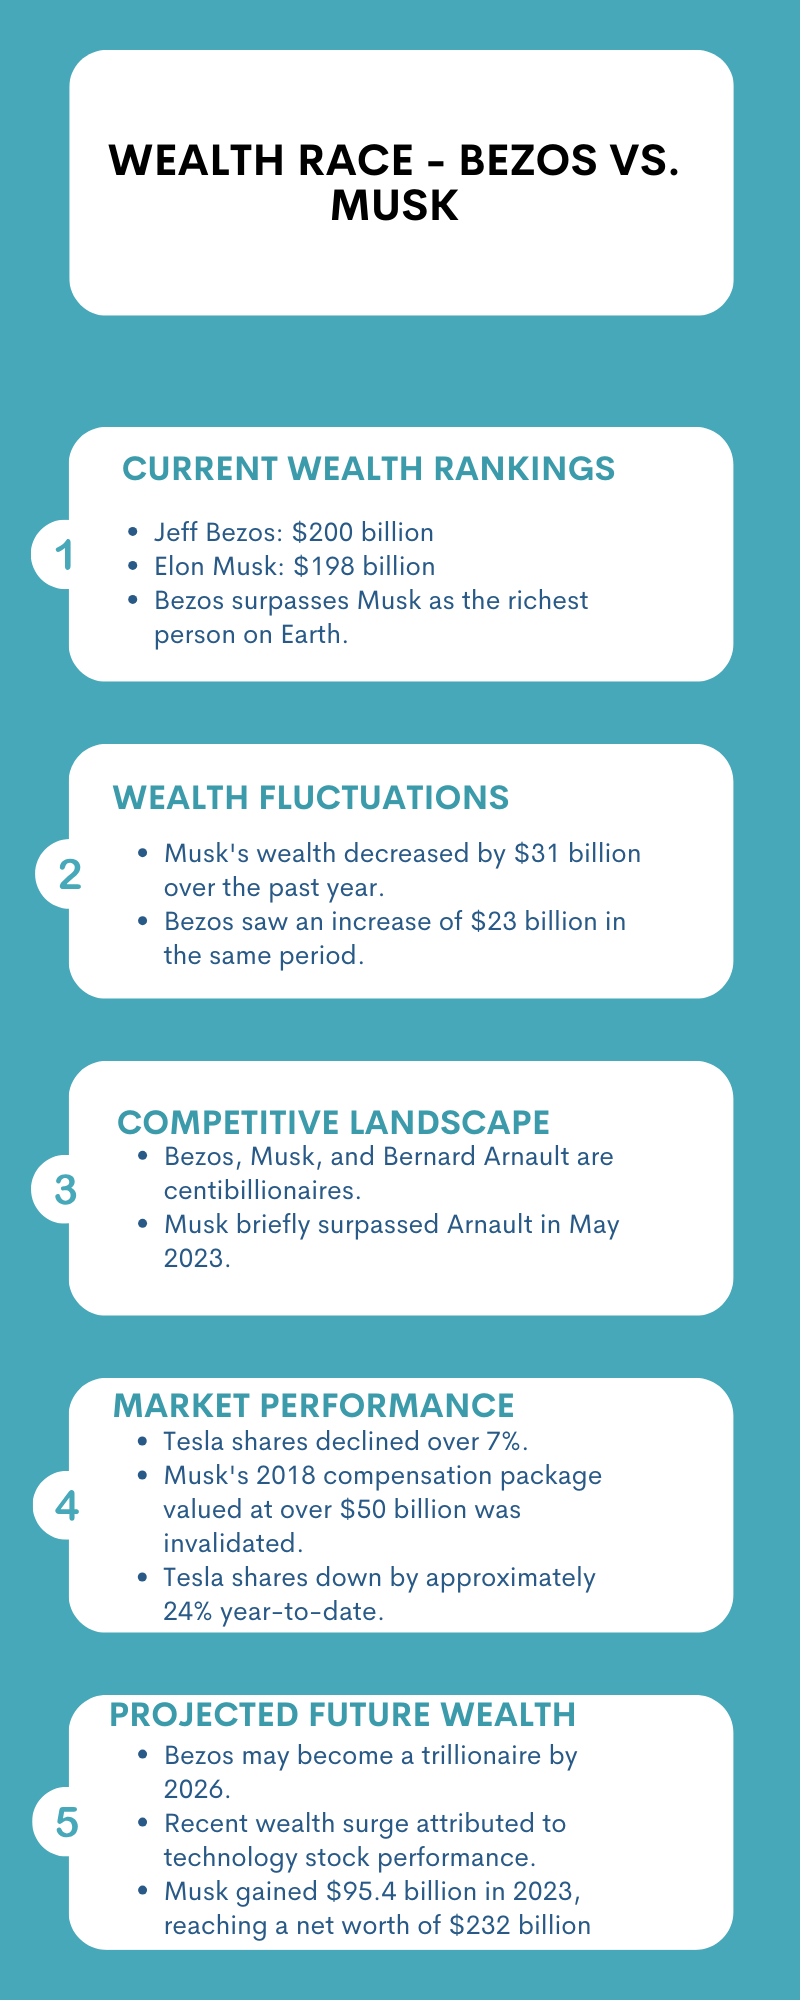 An infographic illustration of Wealth Race - Bezos vs. Musk